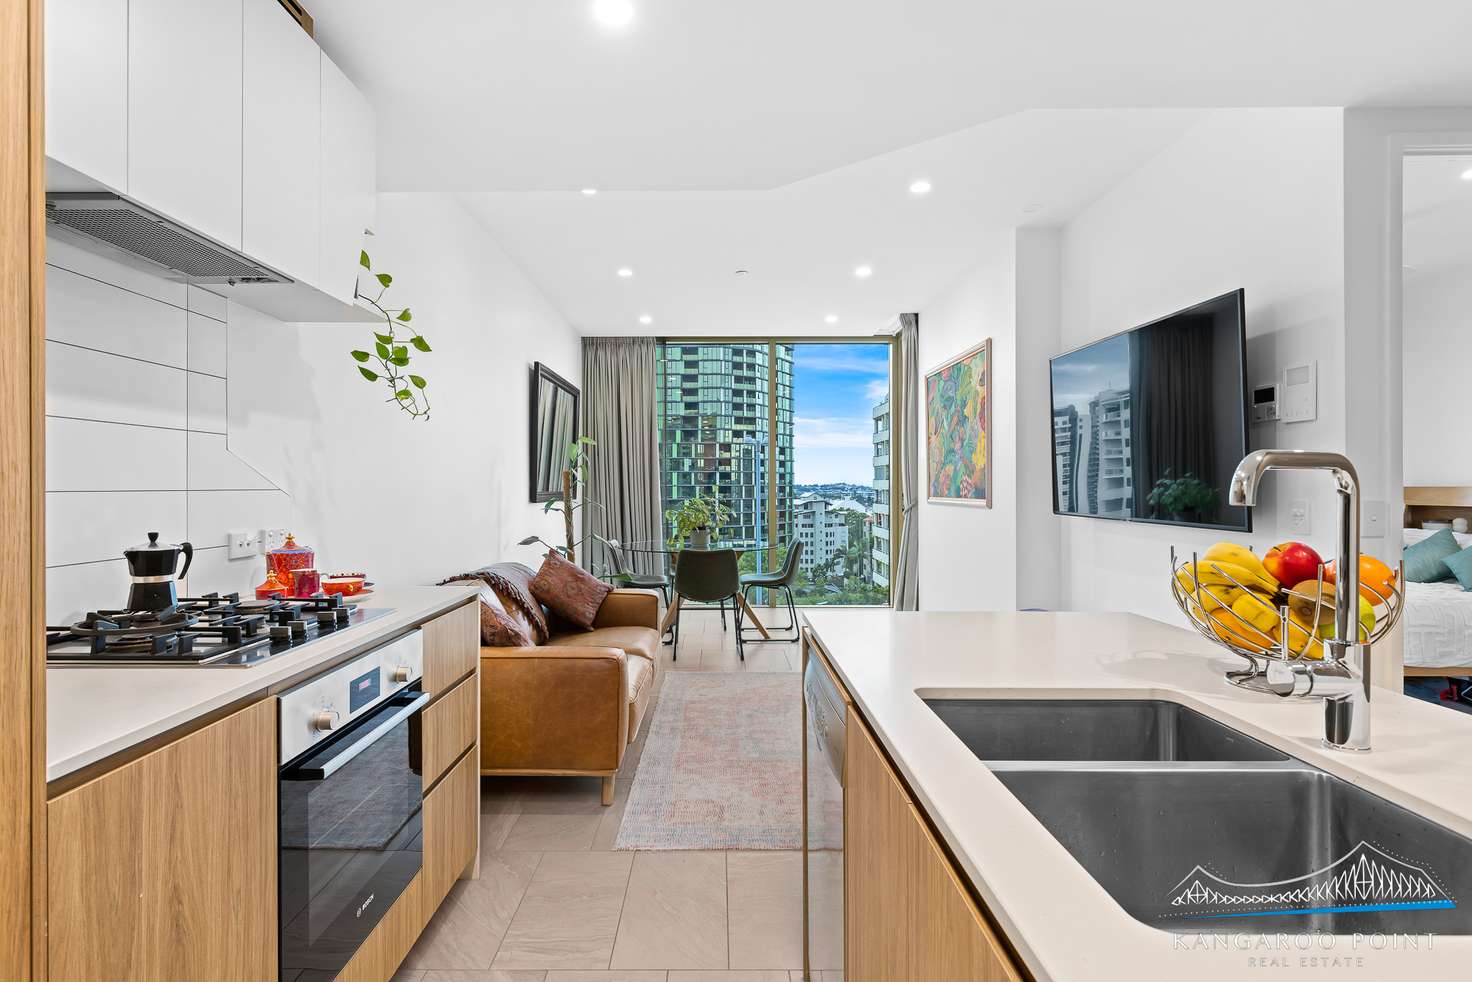 Main view of Homely apartment listing, 25 Shafston Avenue, Kangaroo Point QLD 4169